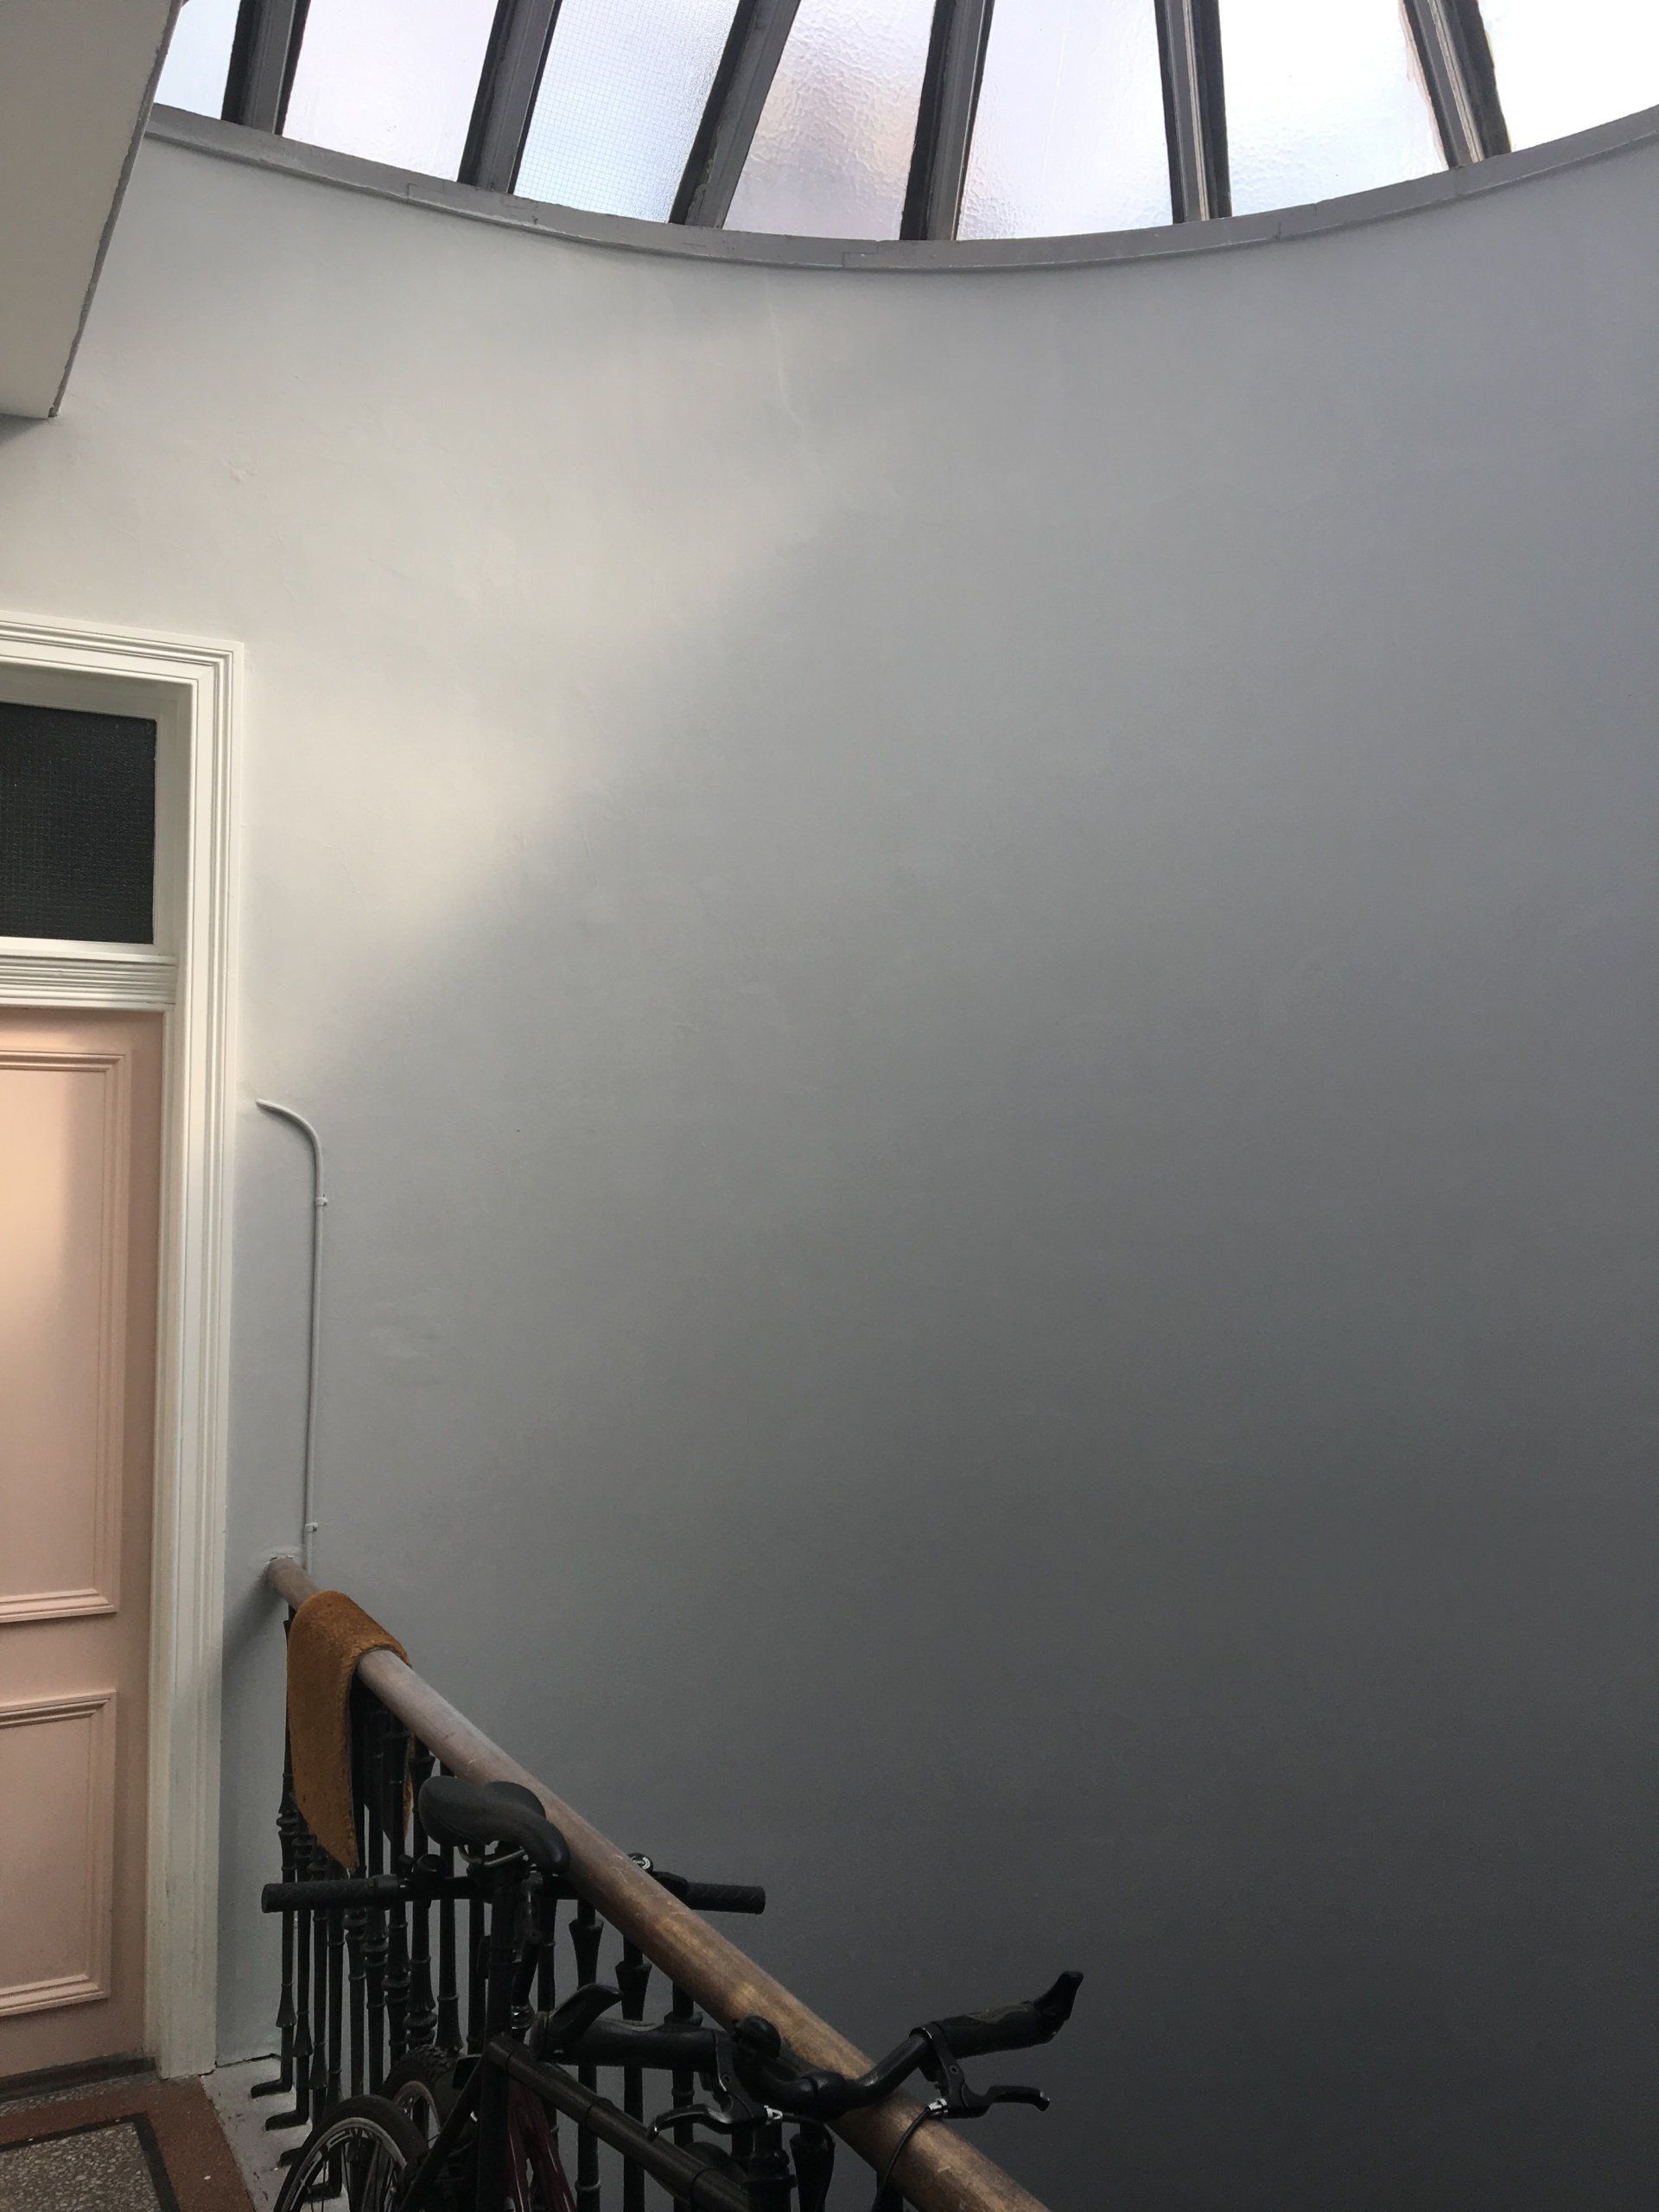 Before and after pictures stair tenement stair painting edinburgh